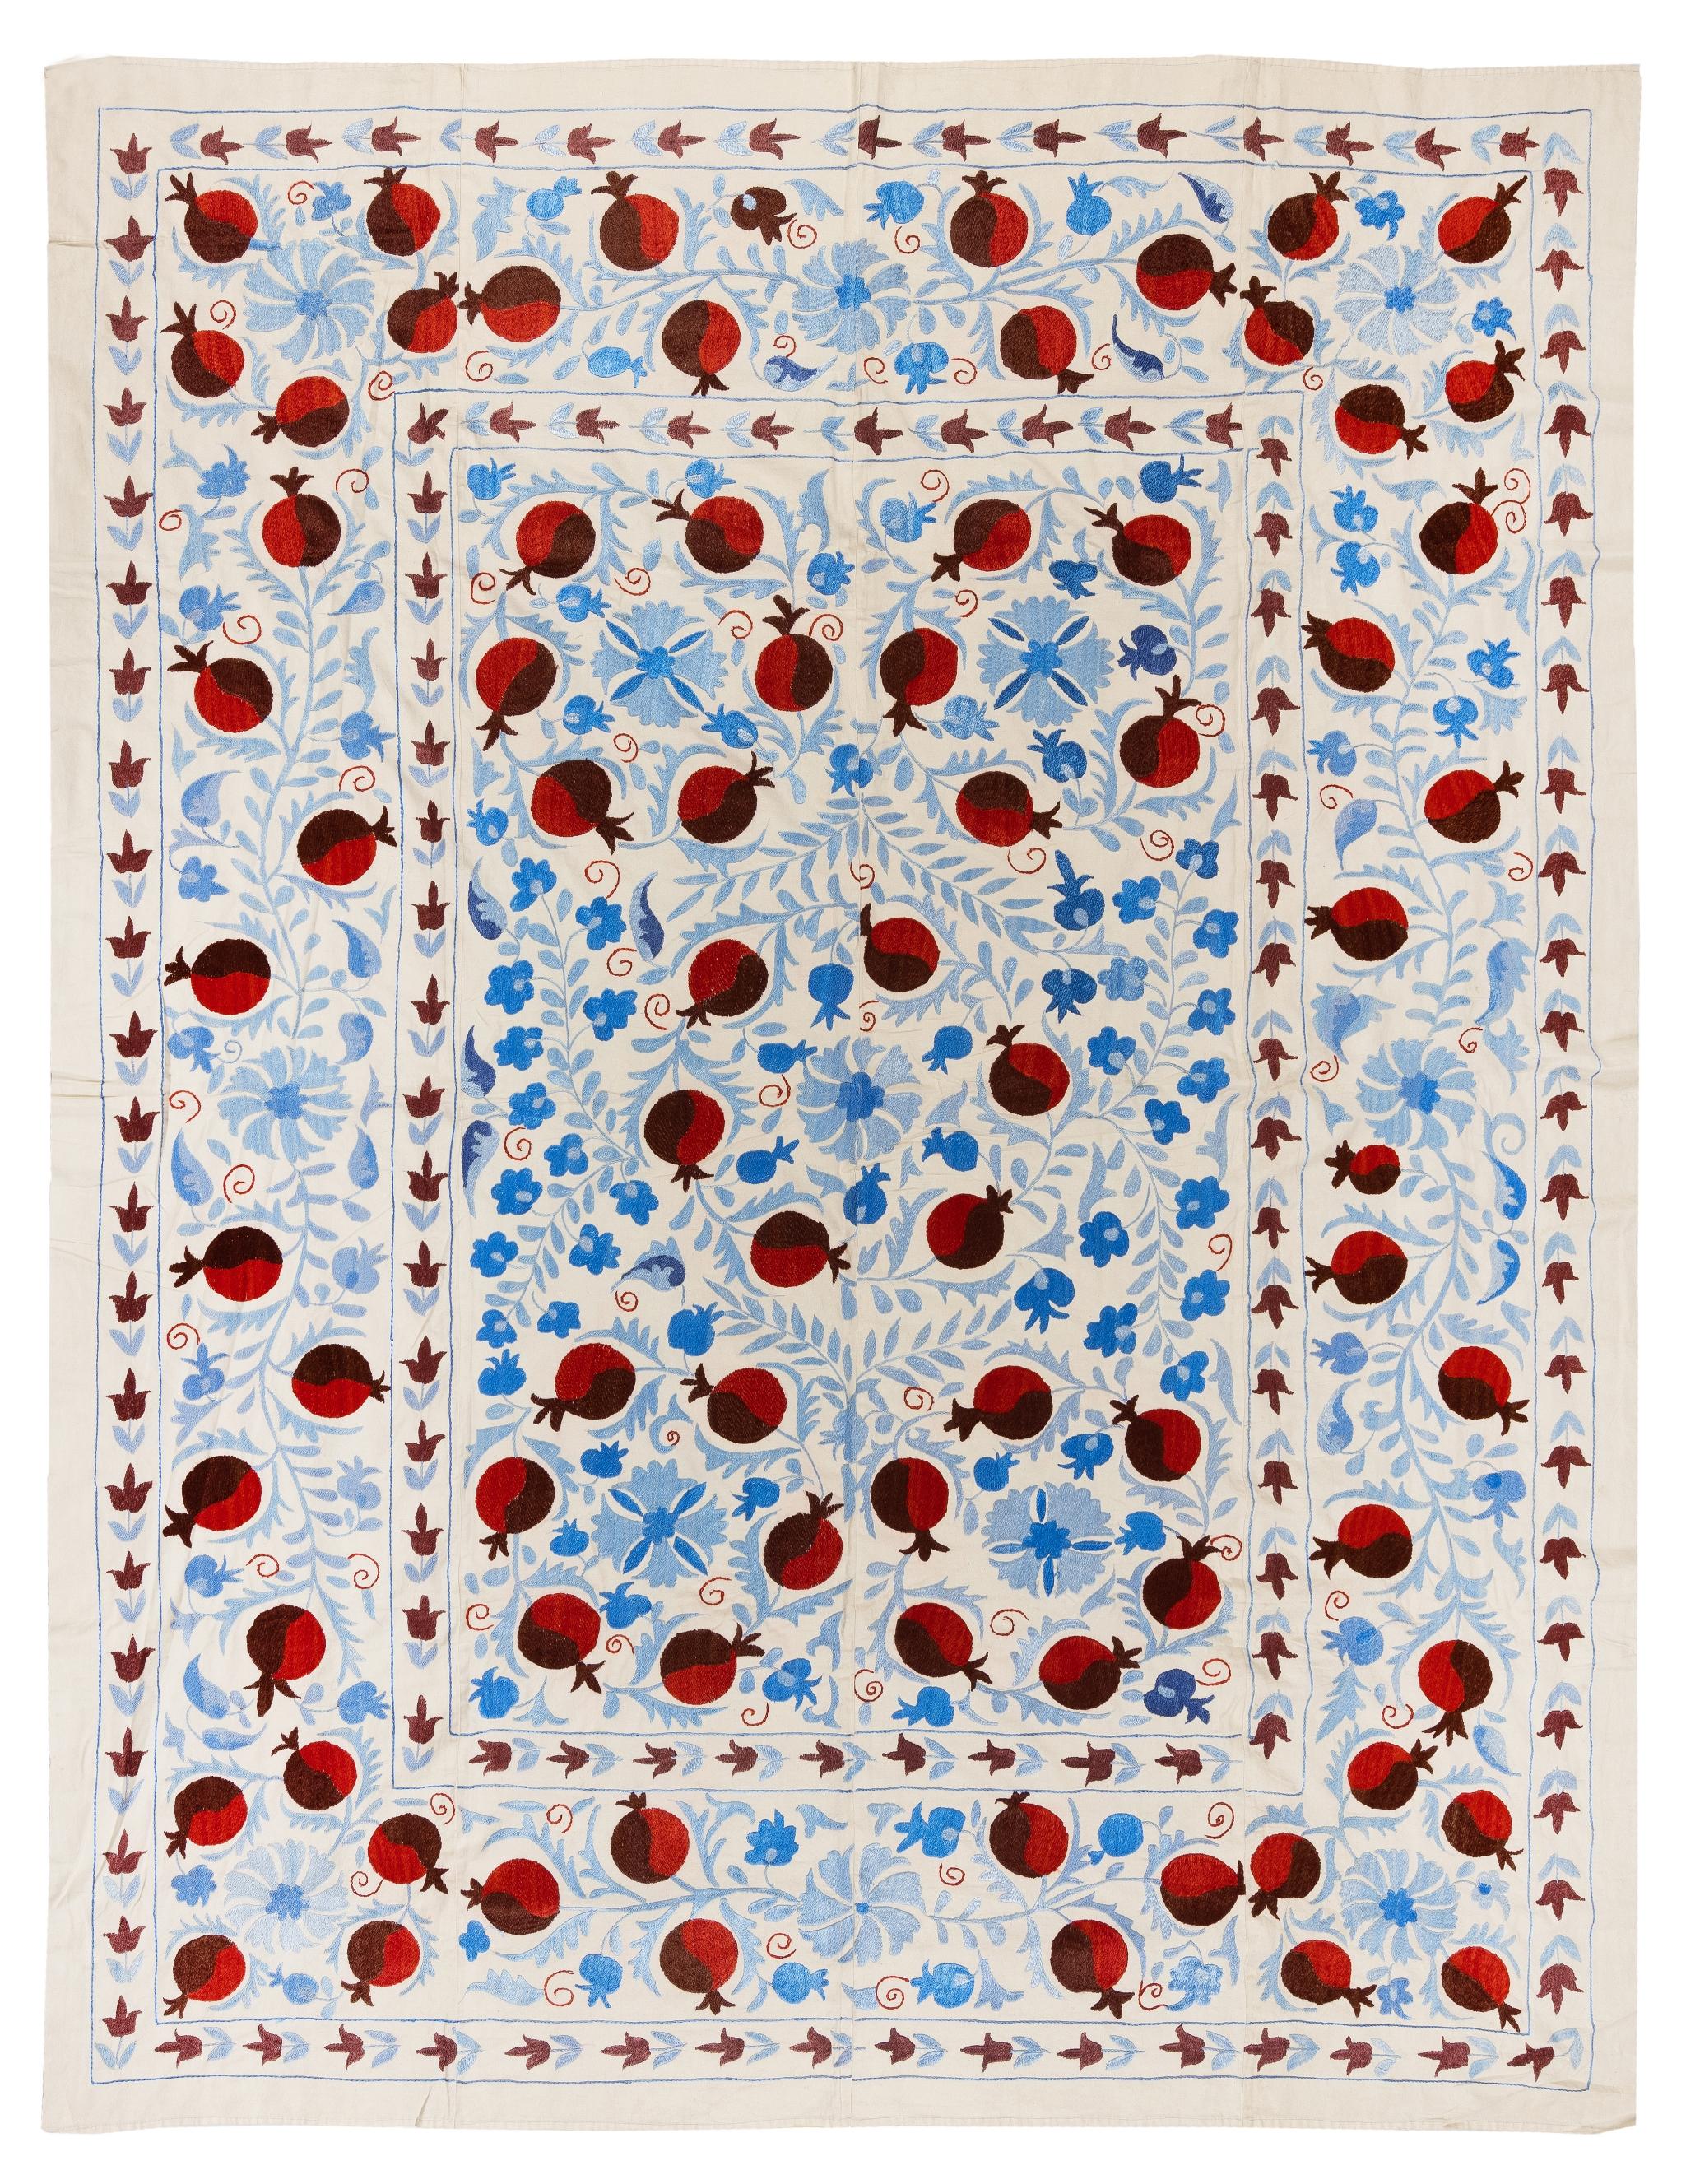 6.3x8 Ft Silk Embroidery Bed Cover in Cream, Red & Light Blue. Suzani Tablecloth For Sale